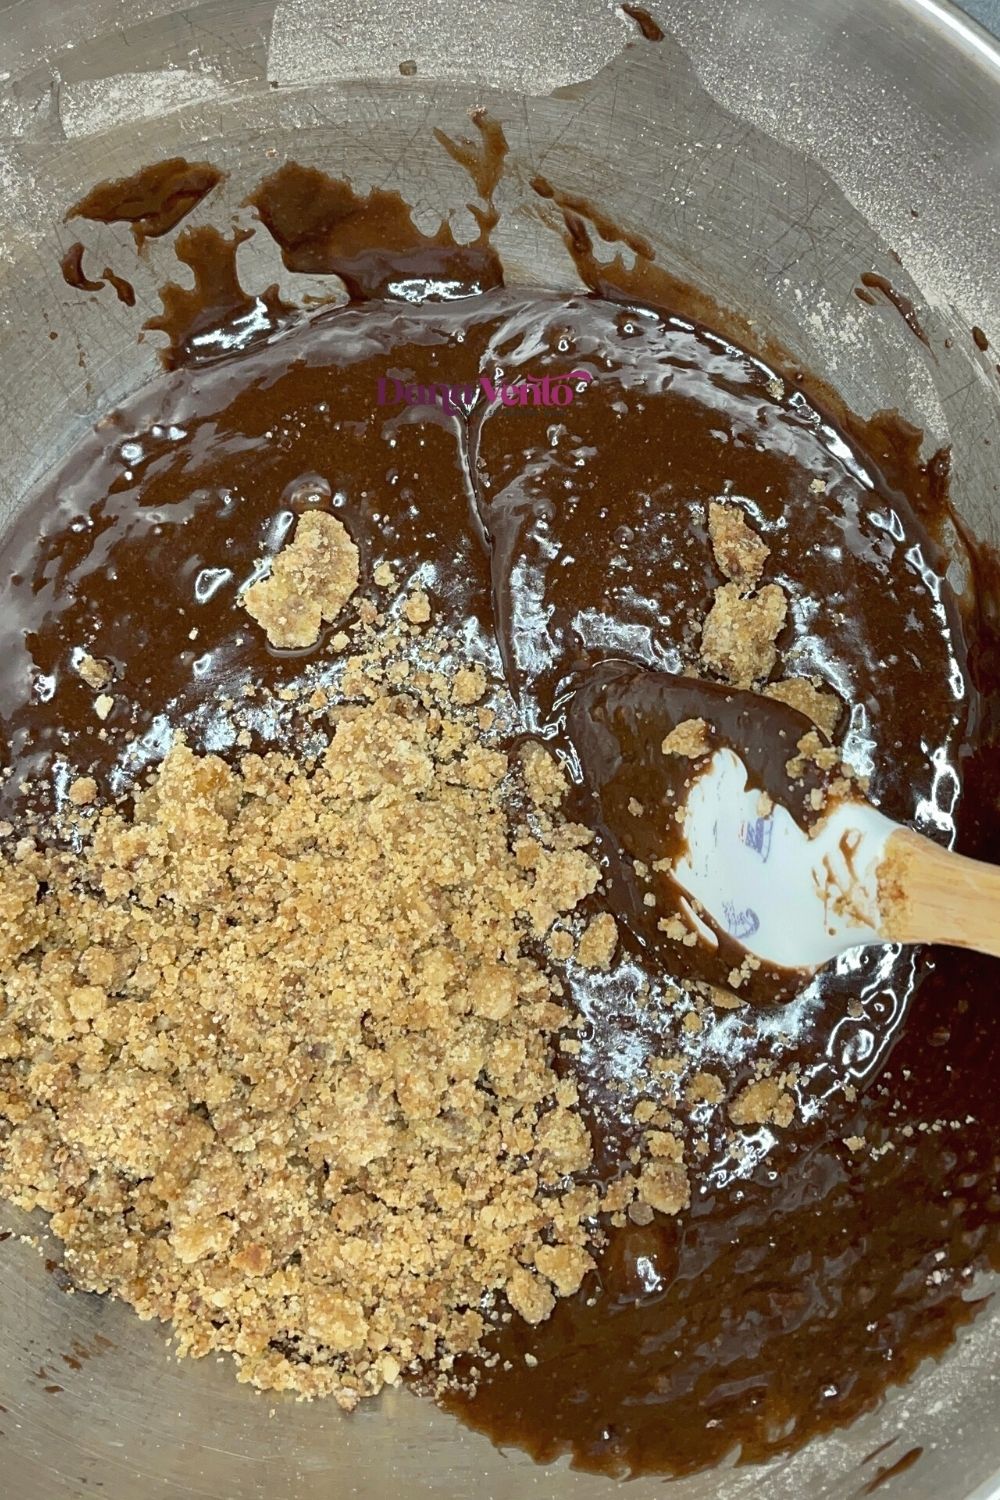 swirling the chocolate brownies with the churro crumbs